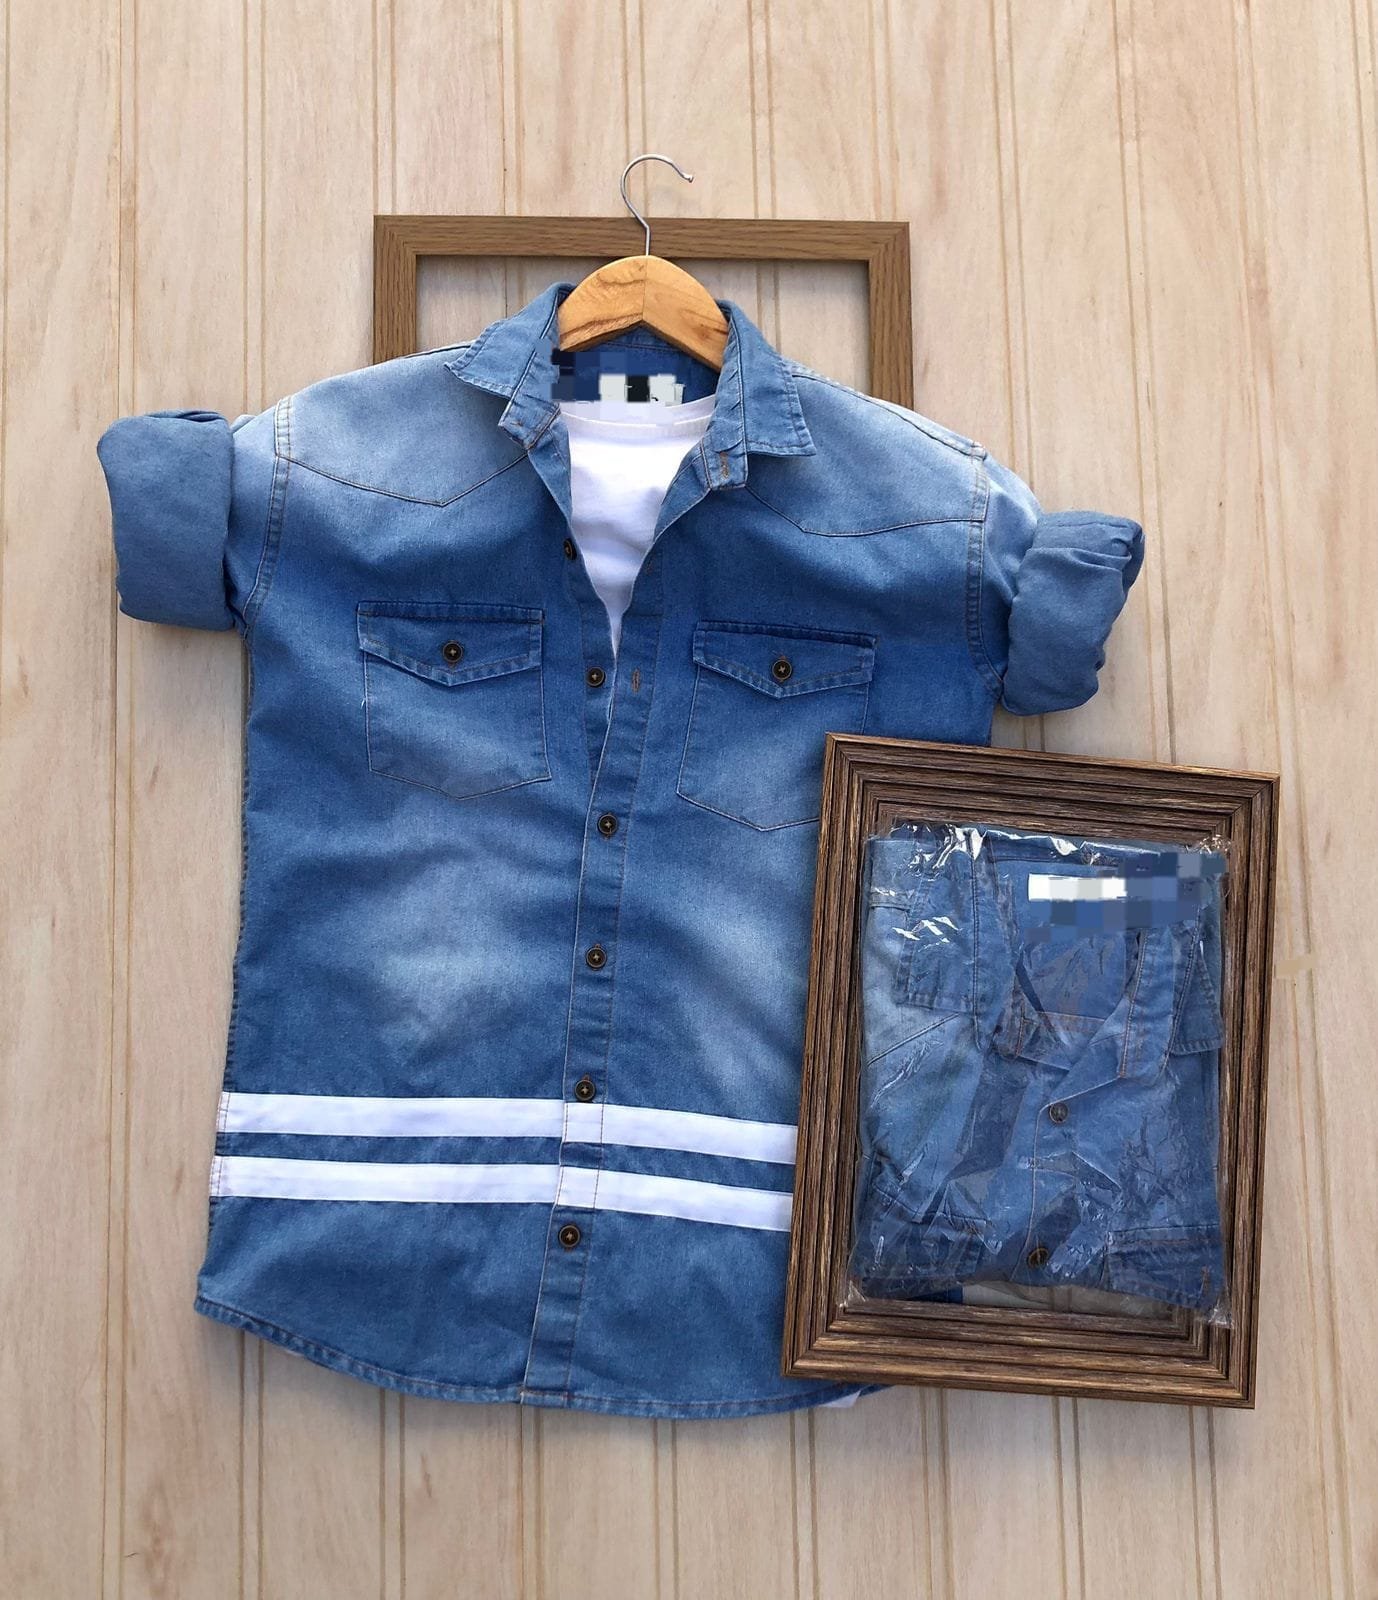 How to Wear a Denim Jacket | The Art of Manliness